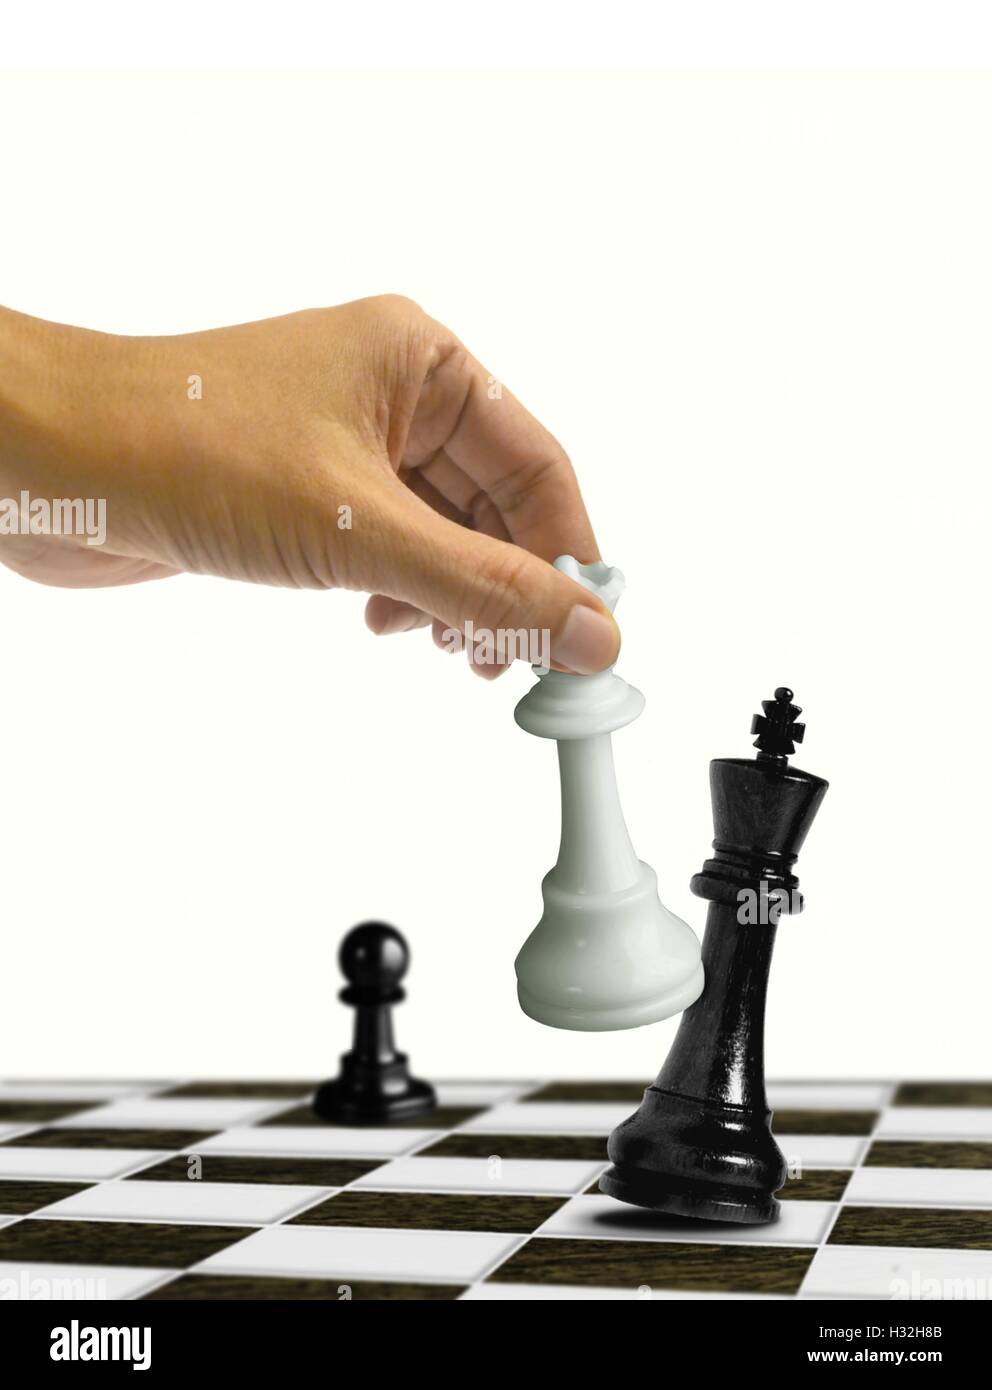 Checkmate In The Chess Game A 3d Illustration Of Defeat Background